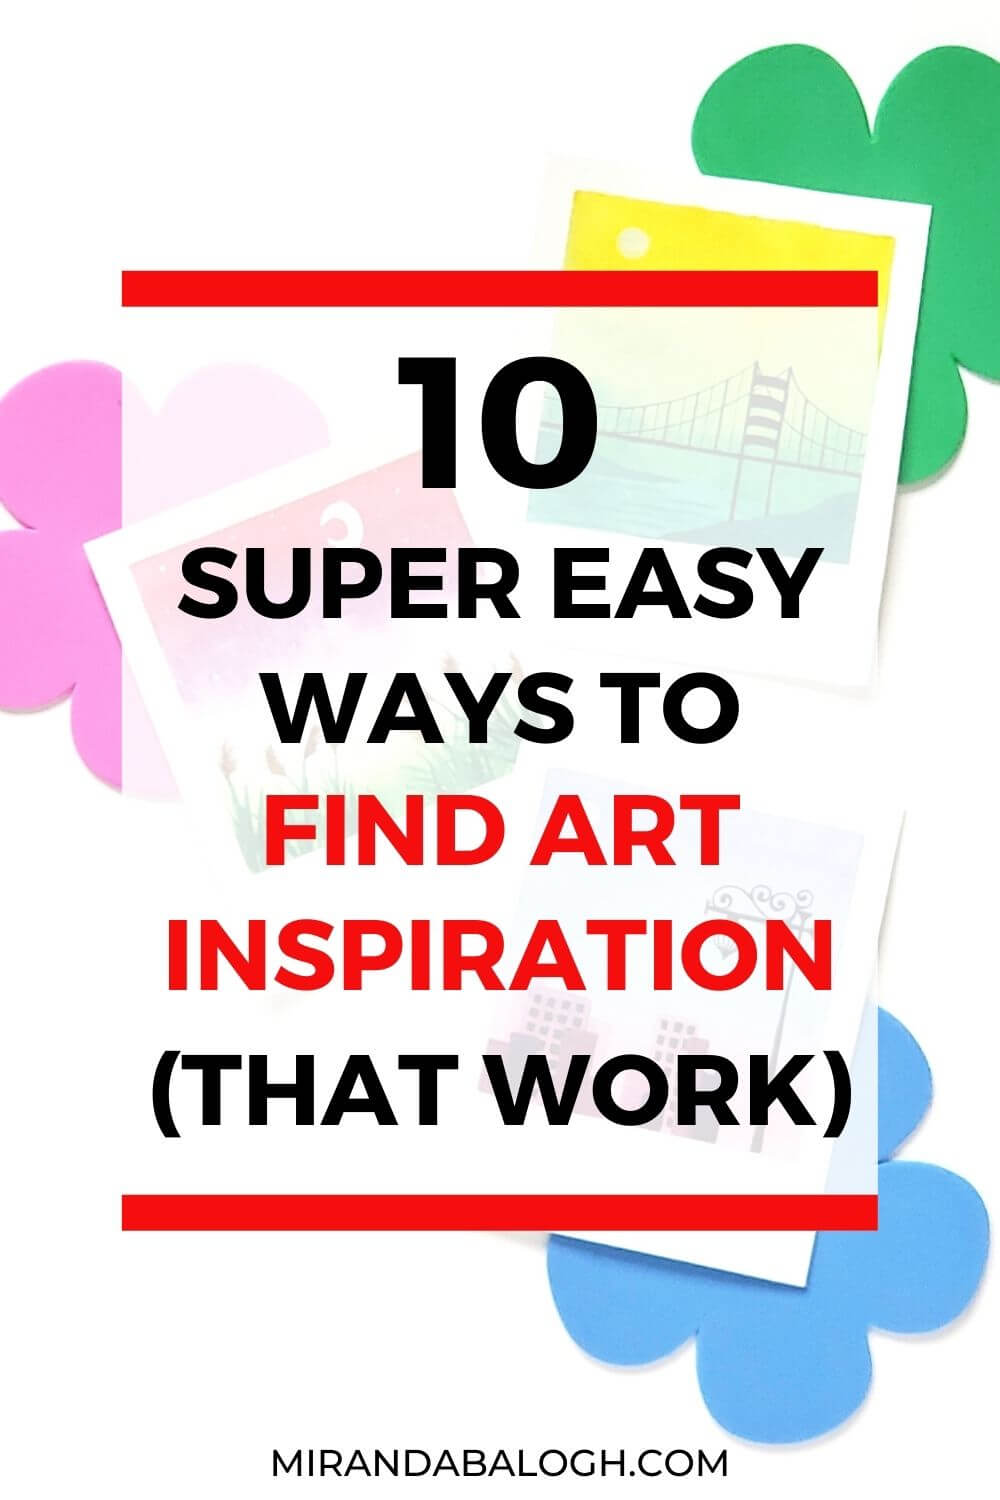 25 easy drawings for when you're feeling uninspired - Gathered